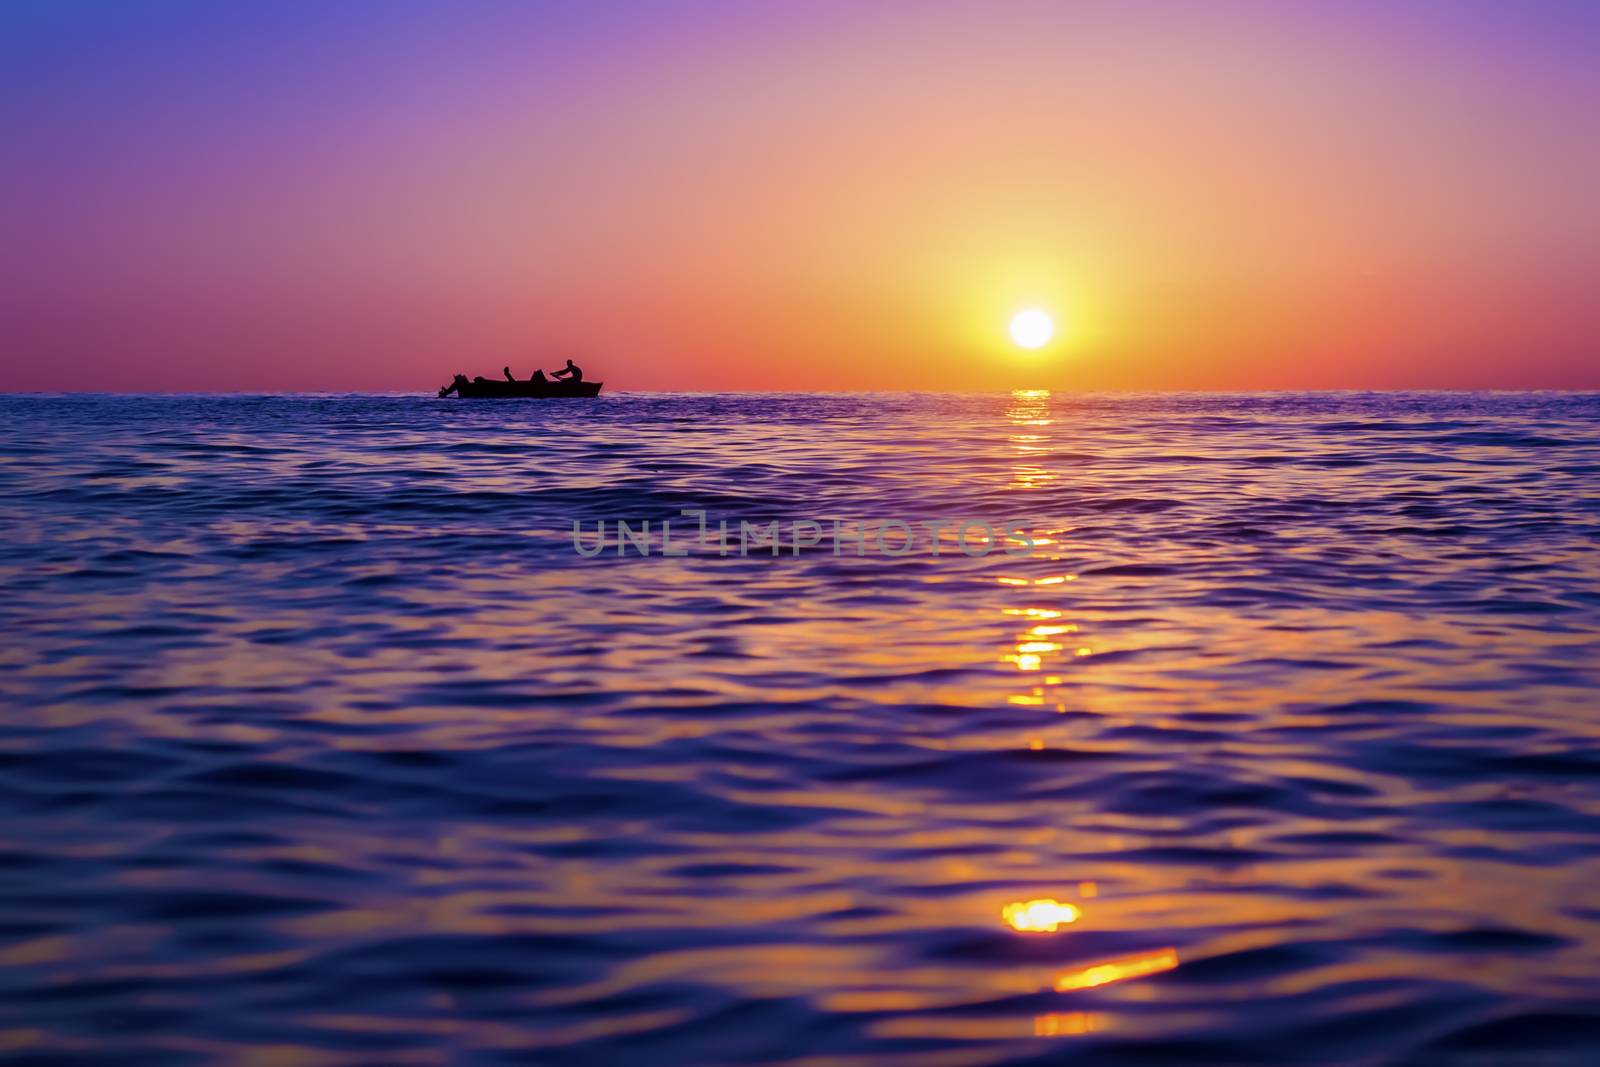 Evening seascape. Silhouette of man on the row boat against the setting sun. The sun reflected off the waves. Purple, pink and yellow colors. Georgia